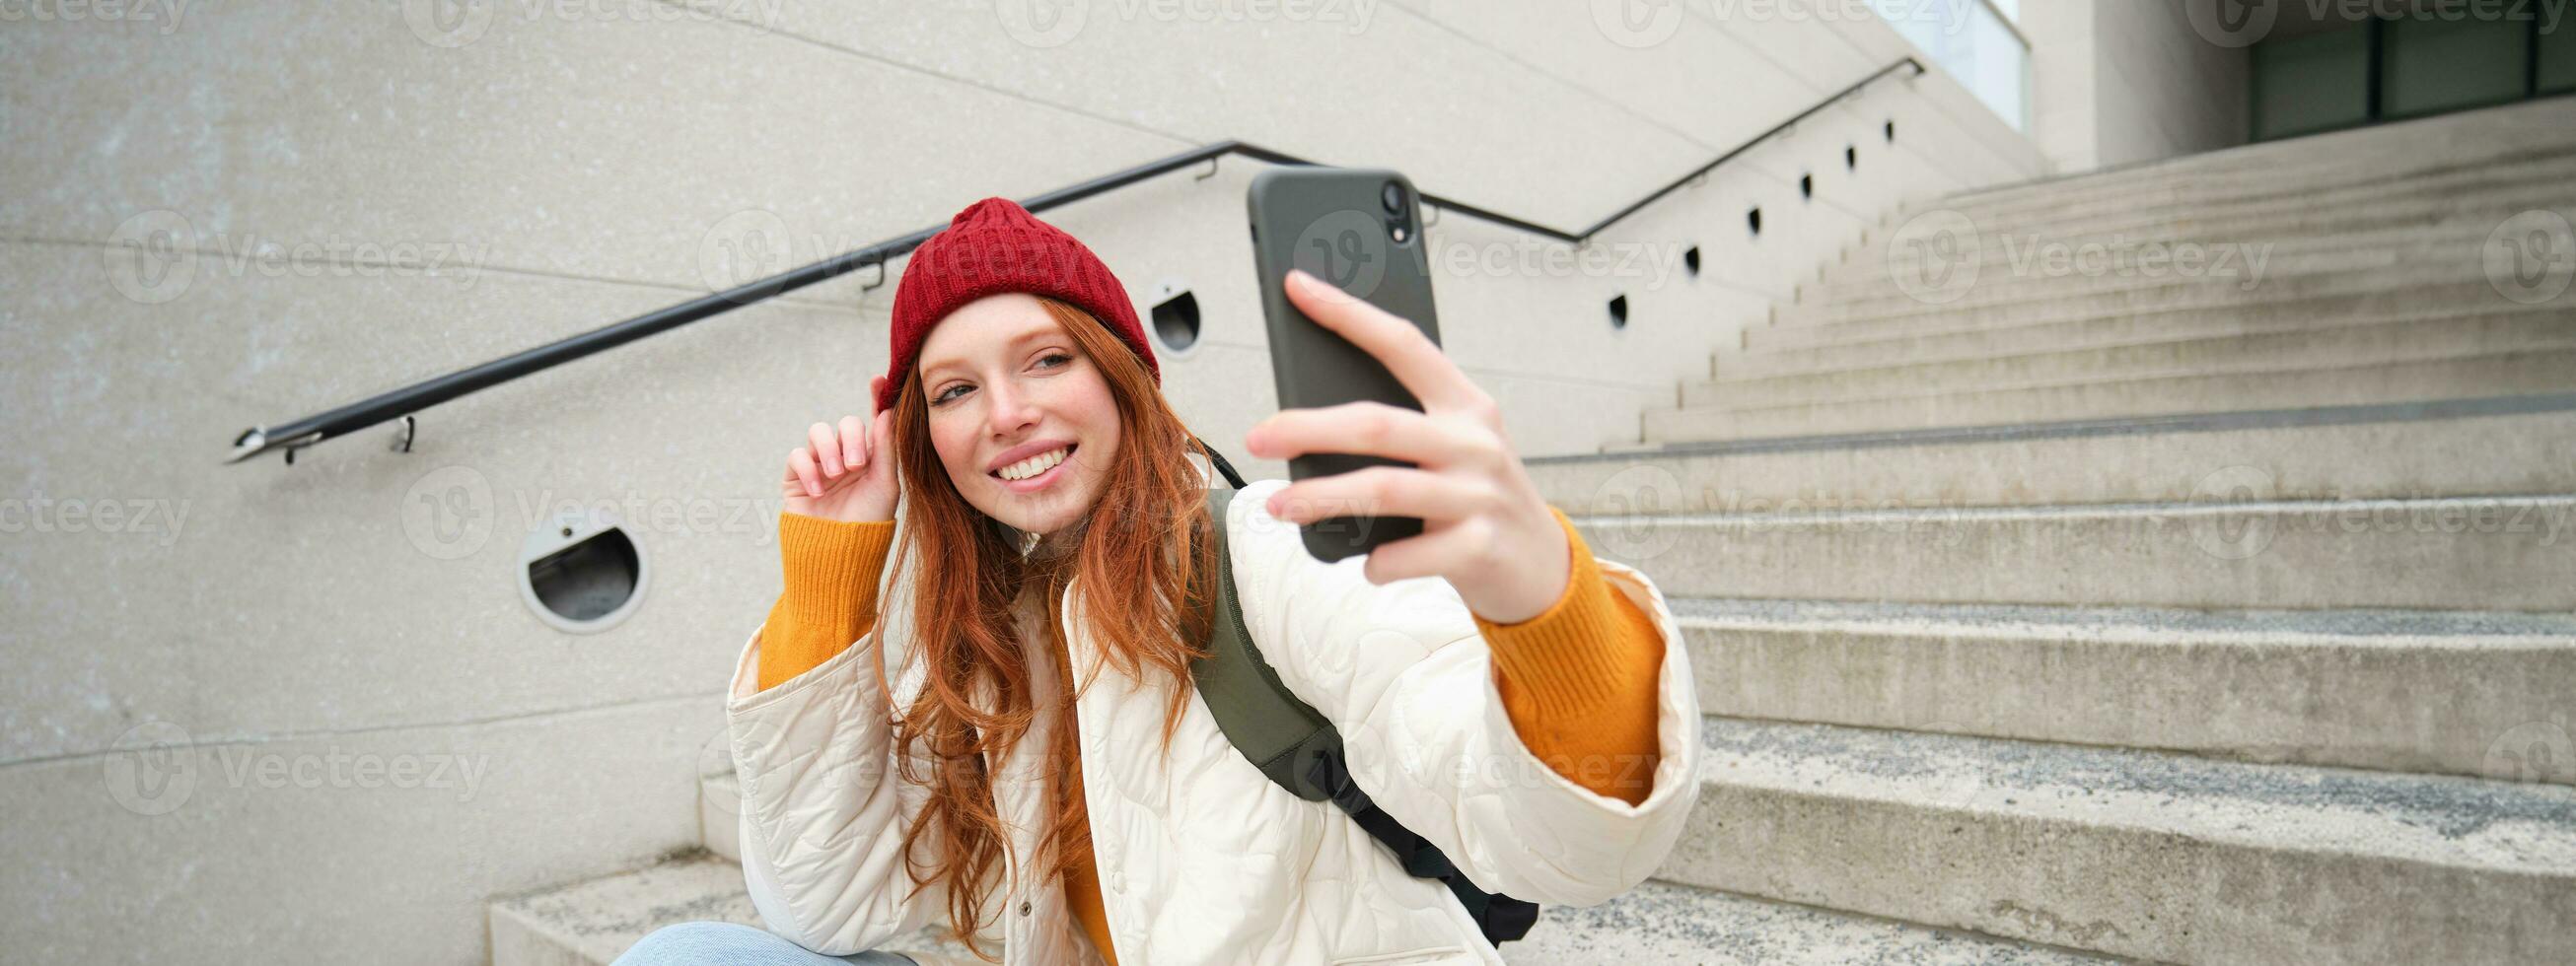 Urban girl takes selfie on street stairs, uses smartphone app to take photo of herself, poses for social media application